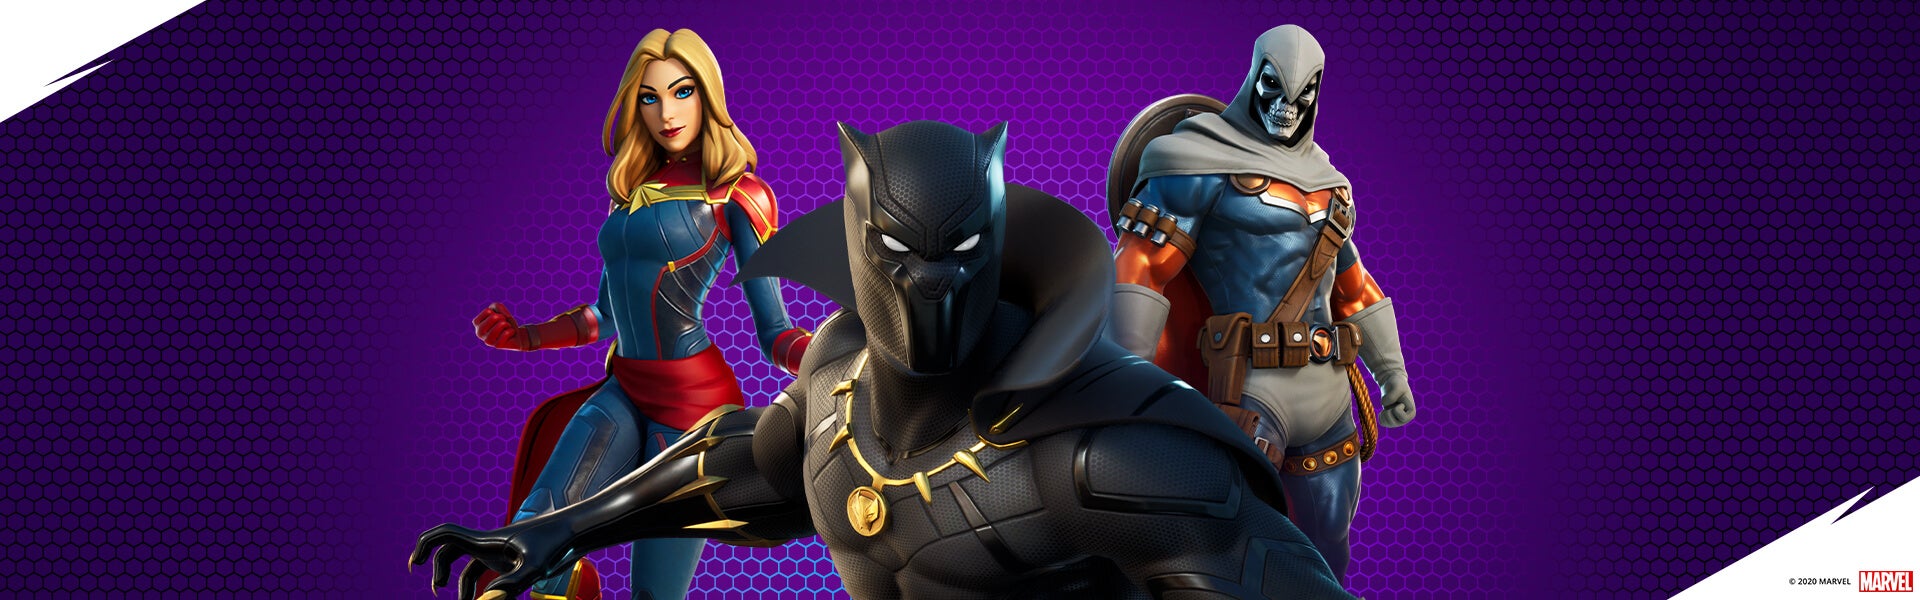 Image for Marvel's Black Panther and Wakanda Forever emote come to Fortnite